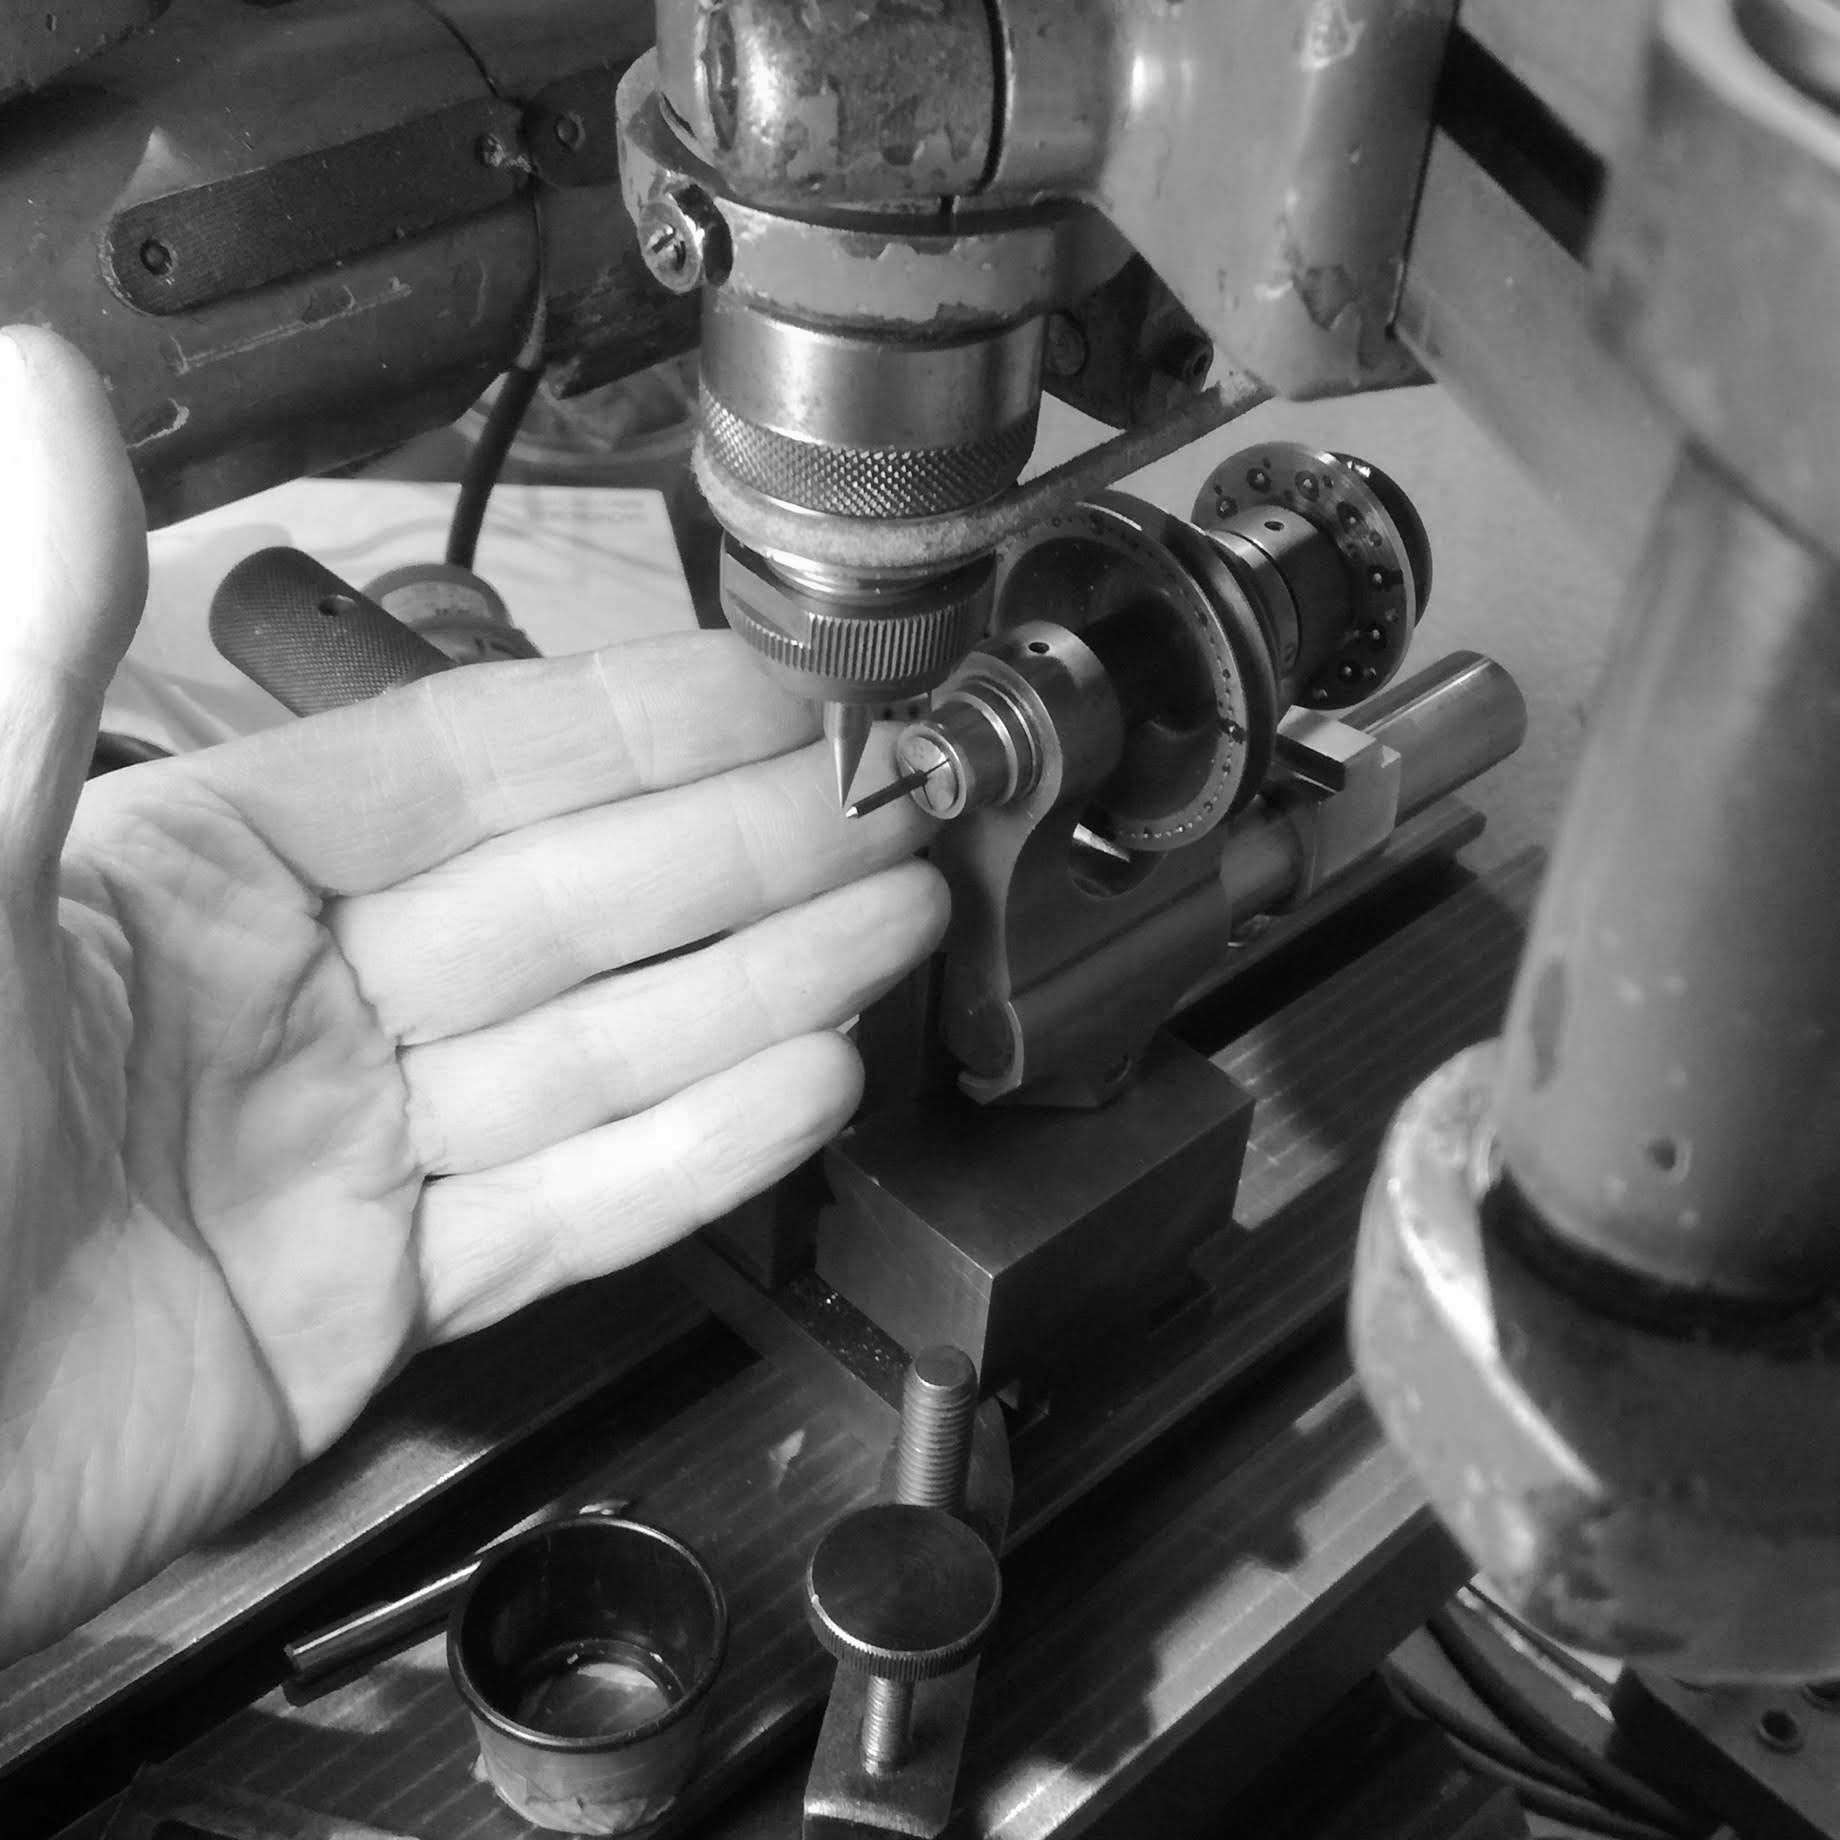 Centering the dividing head with the spindle nose of the pantograph.